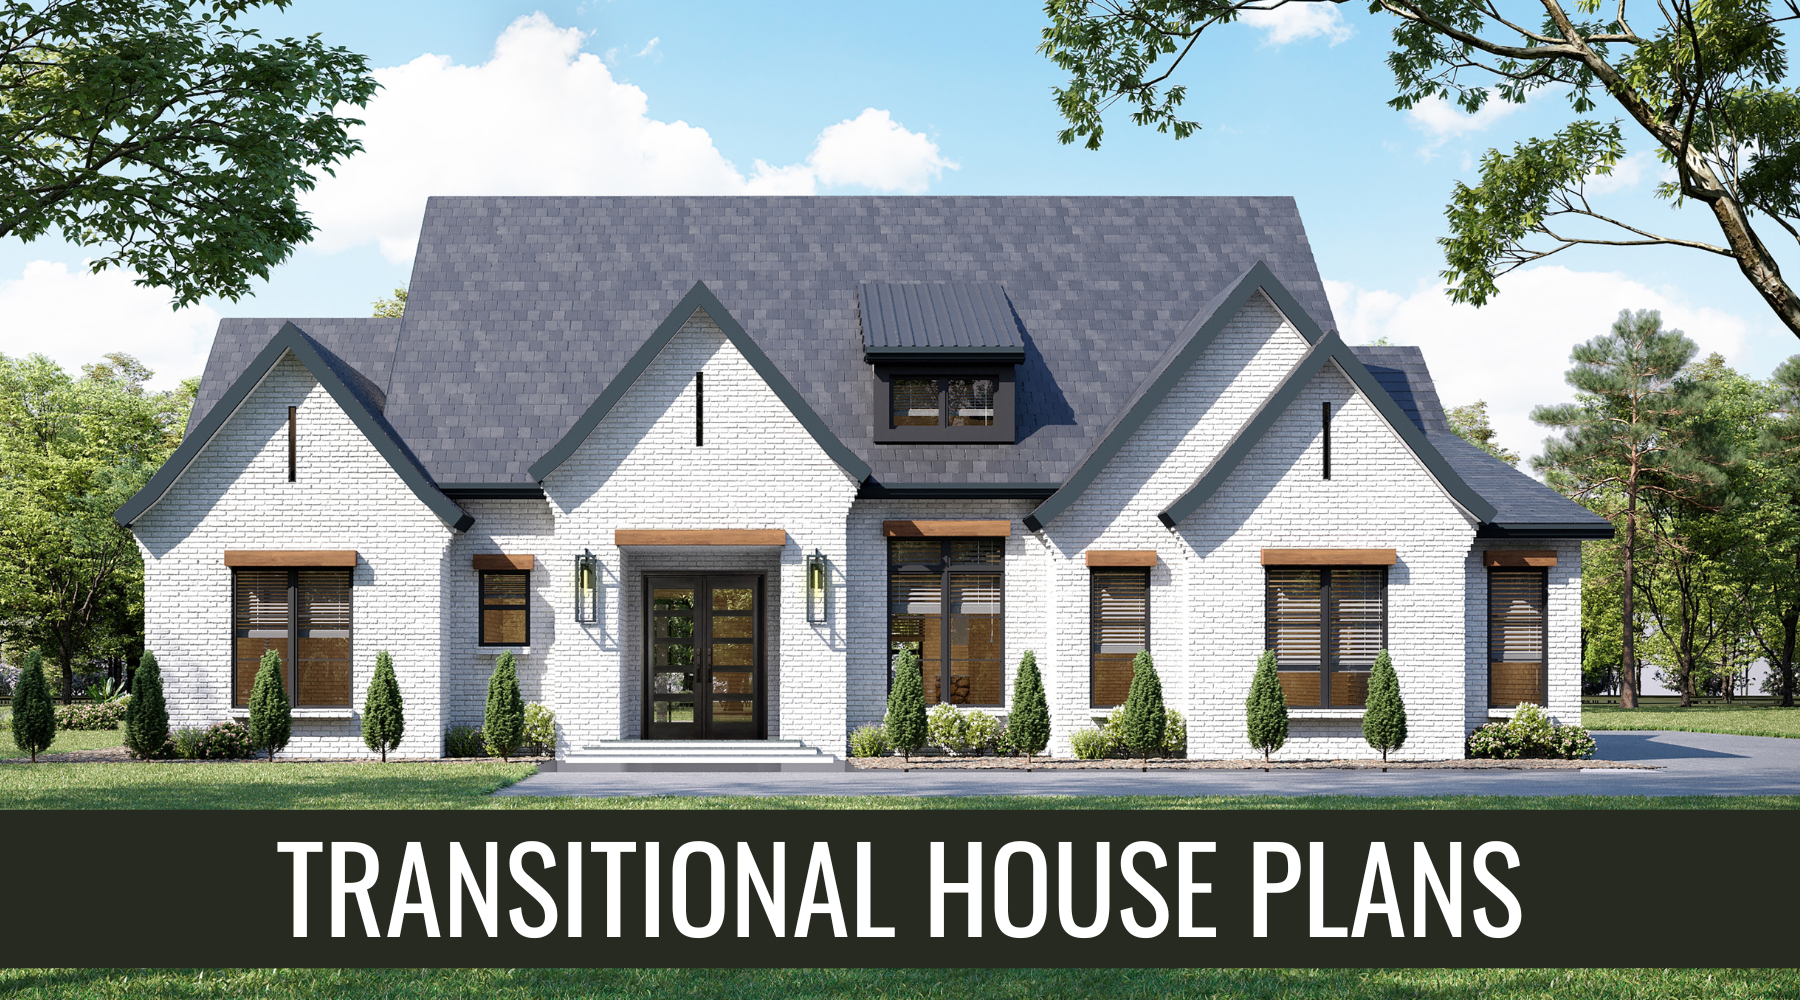 Most Loved Trend: Transitional House Plans